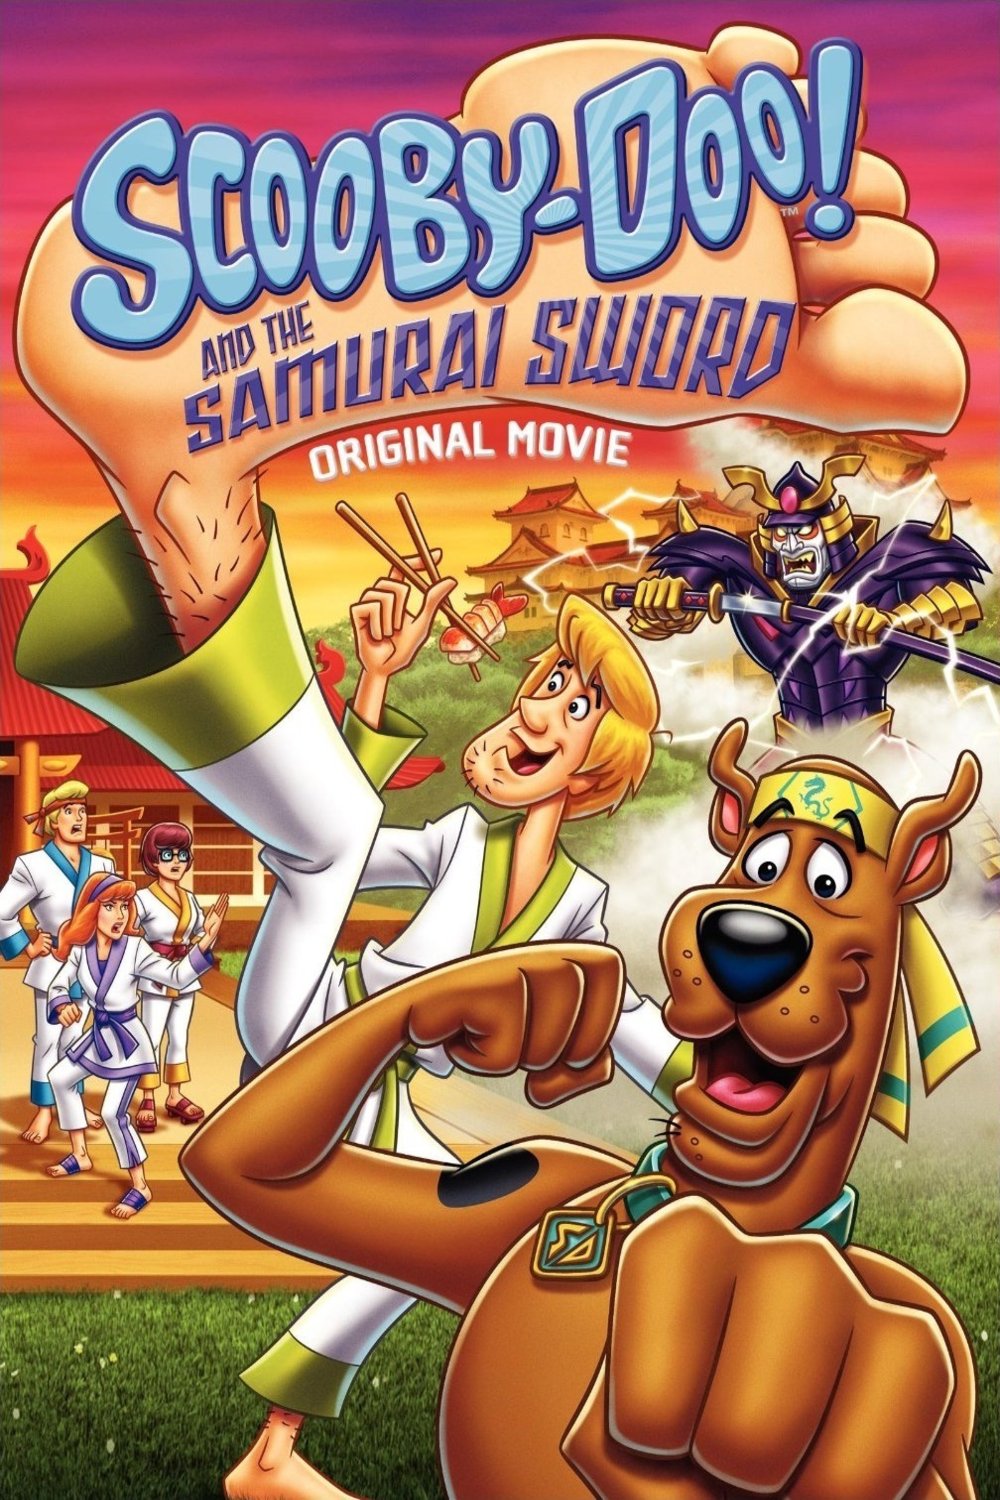 Poster of the movie Scooby-Doo and the Samurai Sword